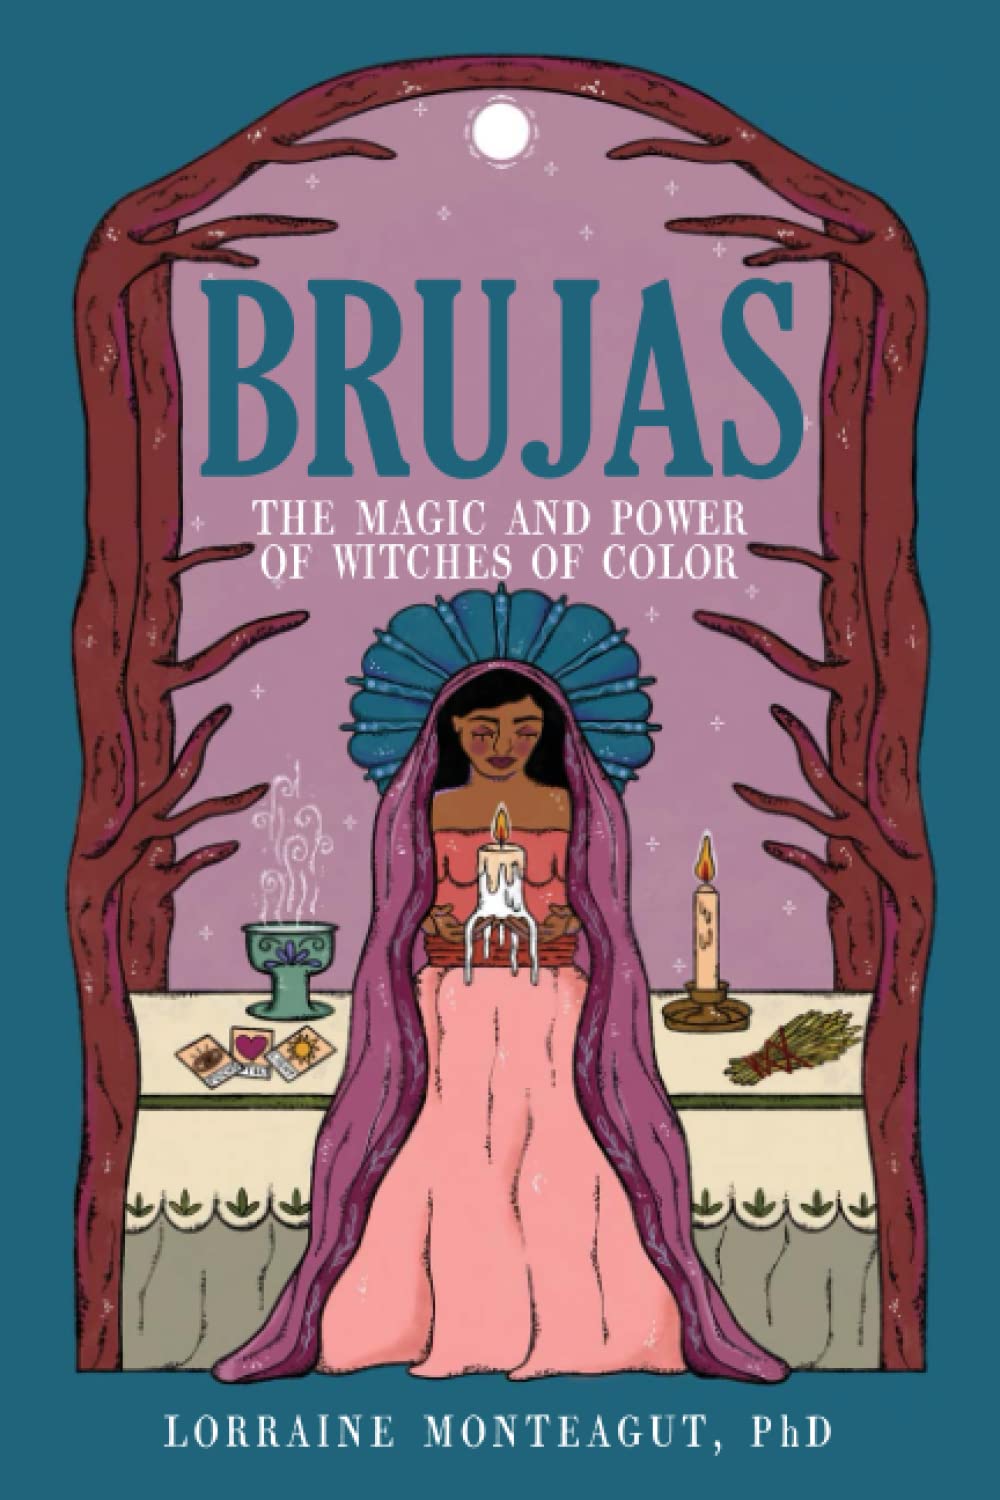 Brujas: The Magic and Power of Witches of Color, by Lorraine Monteagut